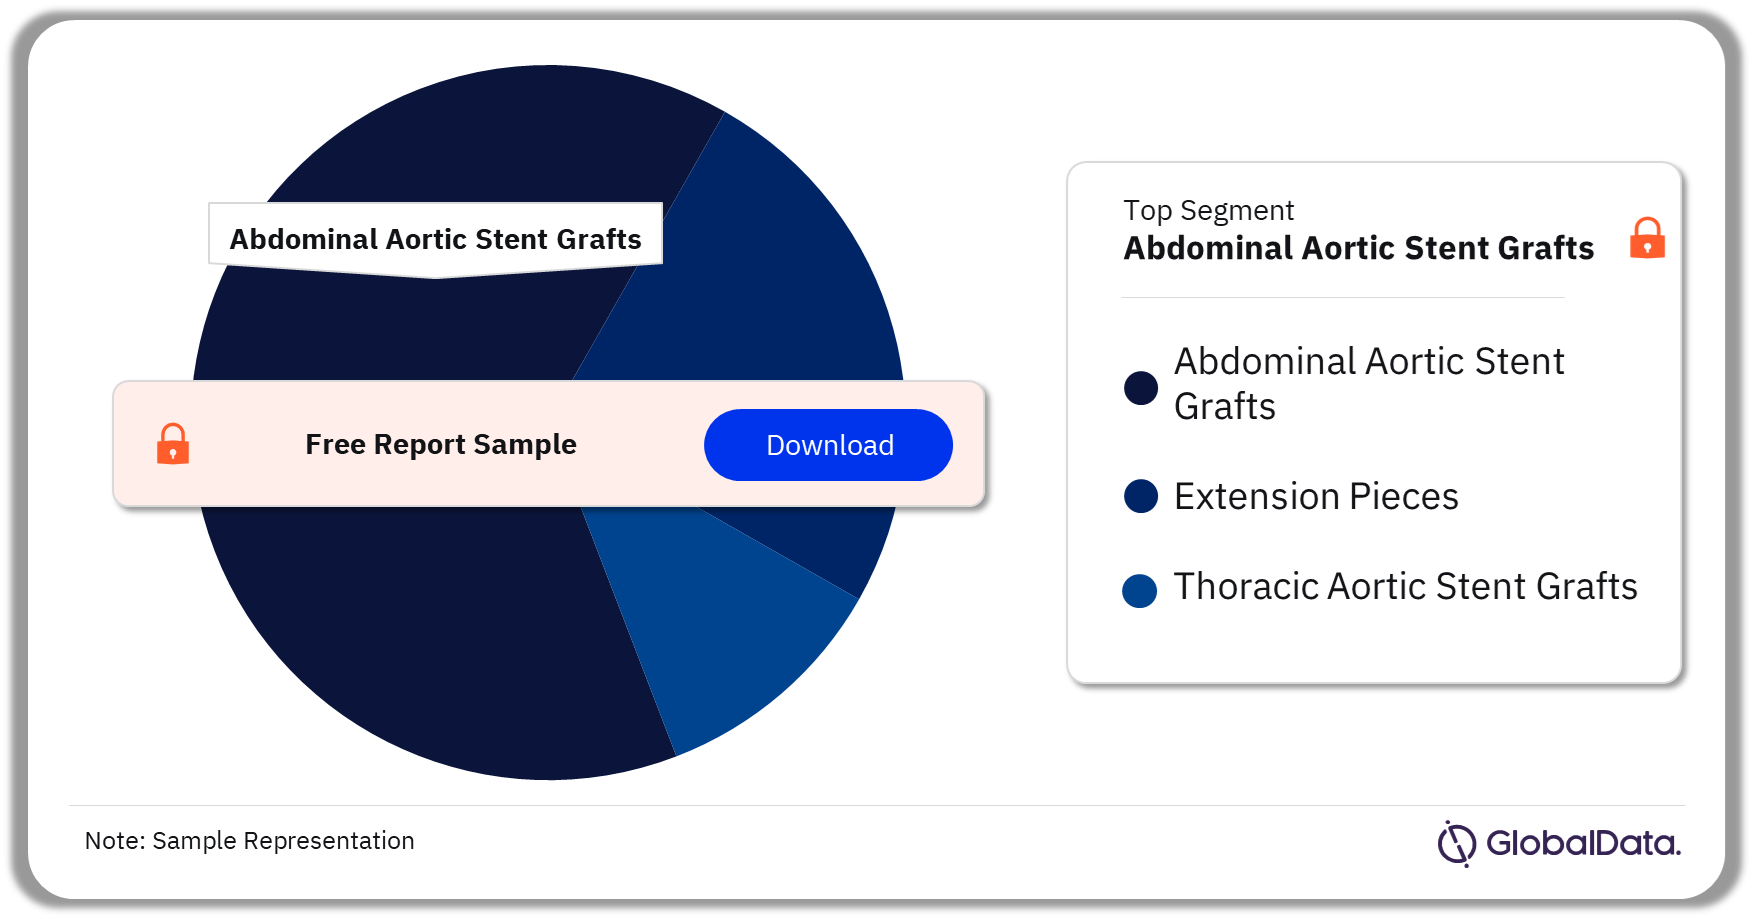 Aortic Stent Grafts Market Analysis by Segments, 2023 (%)